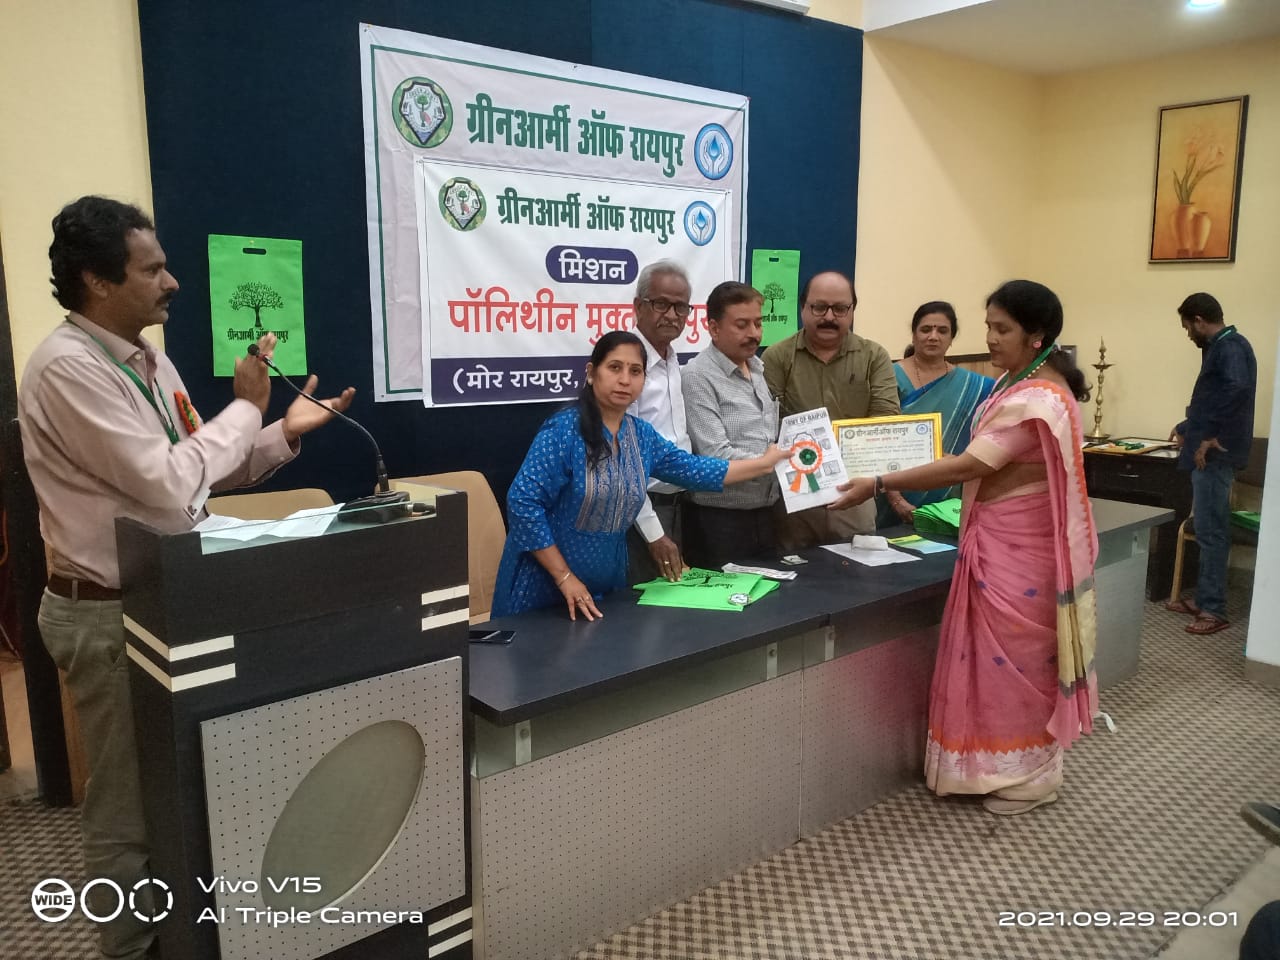 Polythene Free Raipur, Sankalp, Green Army, Environment and Water Conservation, Union Finance Minister Smt Nirmala Sitharaman, Amitabh Dubey, Plantation and Conservation, Water and Pond Conservation, Single Use Plastic Ban, Pollution Control and Cleanliness Work, Raipur, Khabargali